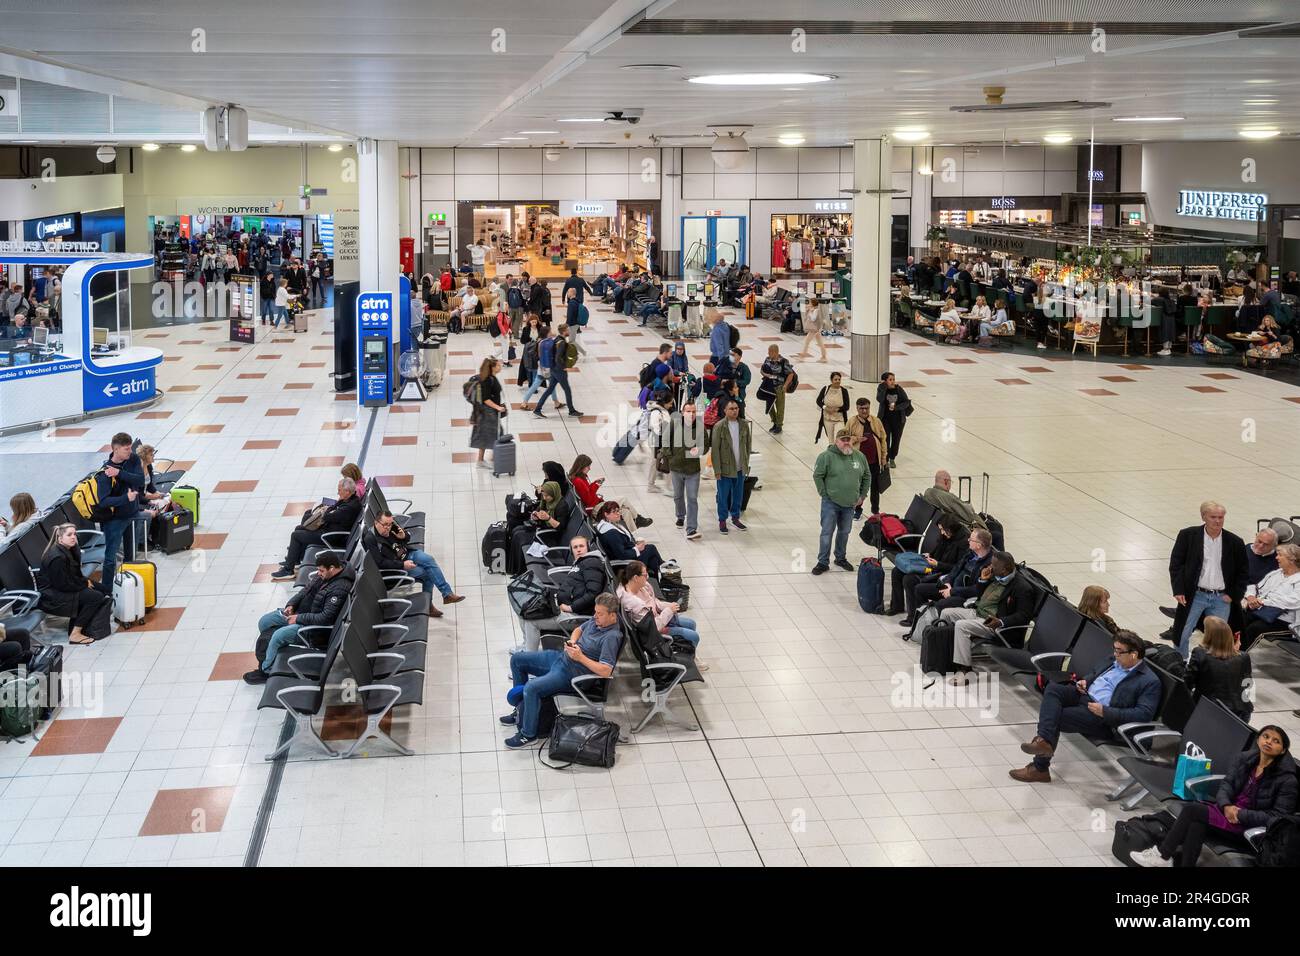 Gatwick Airport - interior of departure lounge in North Terminal with people waiting for their flights, England, UK. London Gatwick Stock Photo